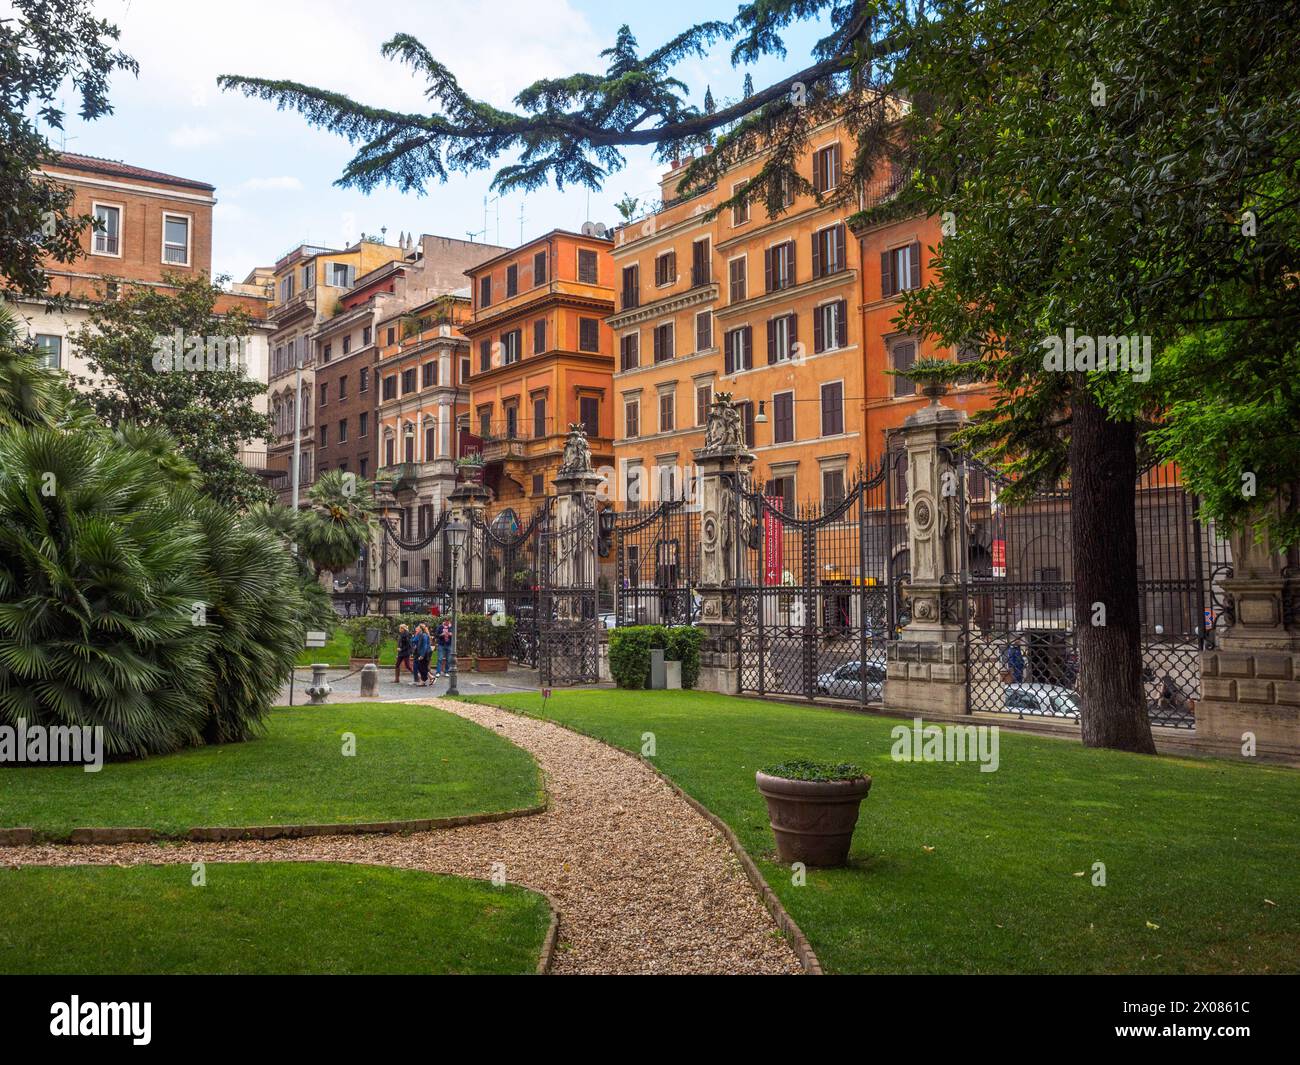 Front gardens of Palazzo Barberini that houses the Galleria Nazionale d'Arte Antica - Rome, Italy Stock Photo